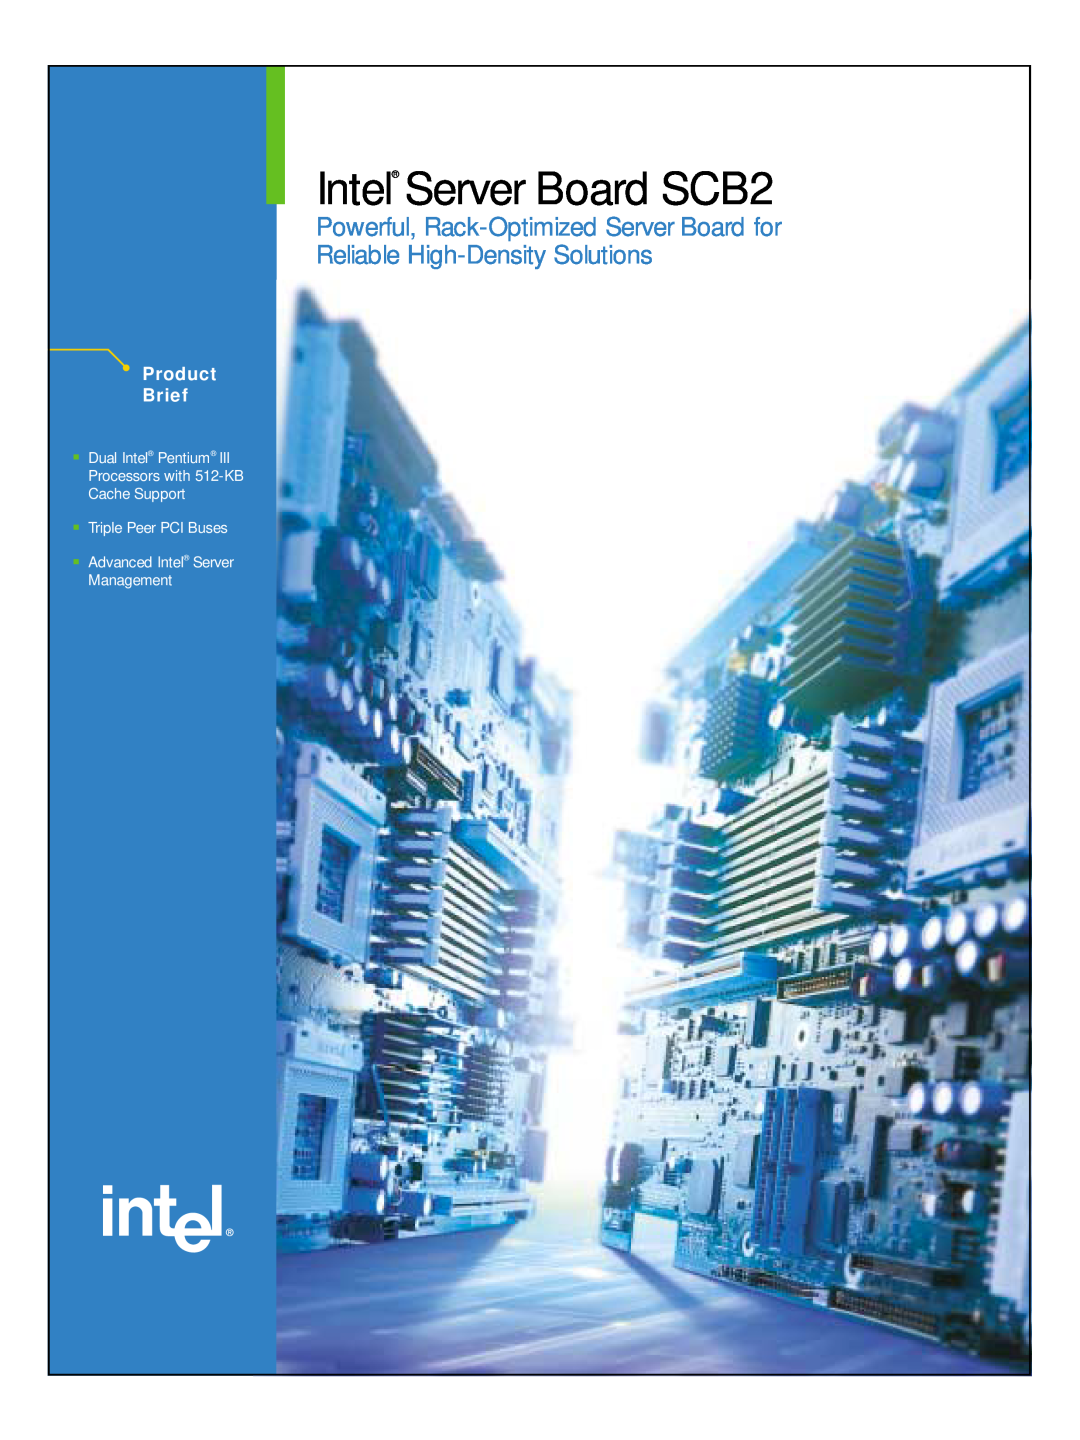 Intel SCB2 manual Powerful, Rack-OptimizedServer Board for, Reliable High-DensitySolutions, Product Brief 